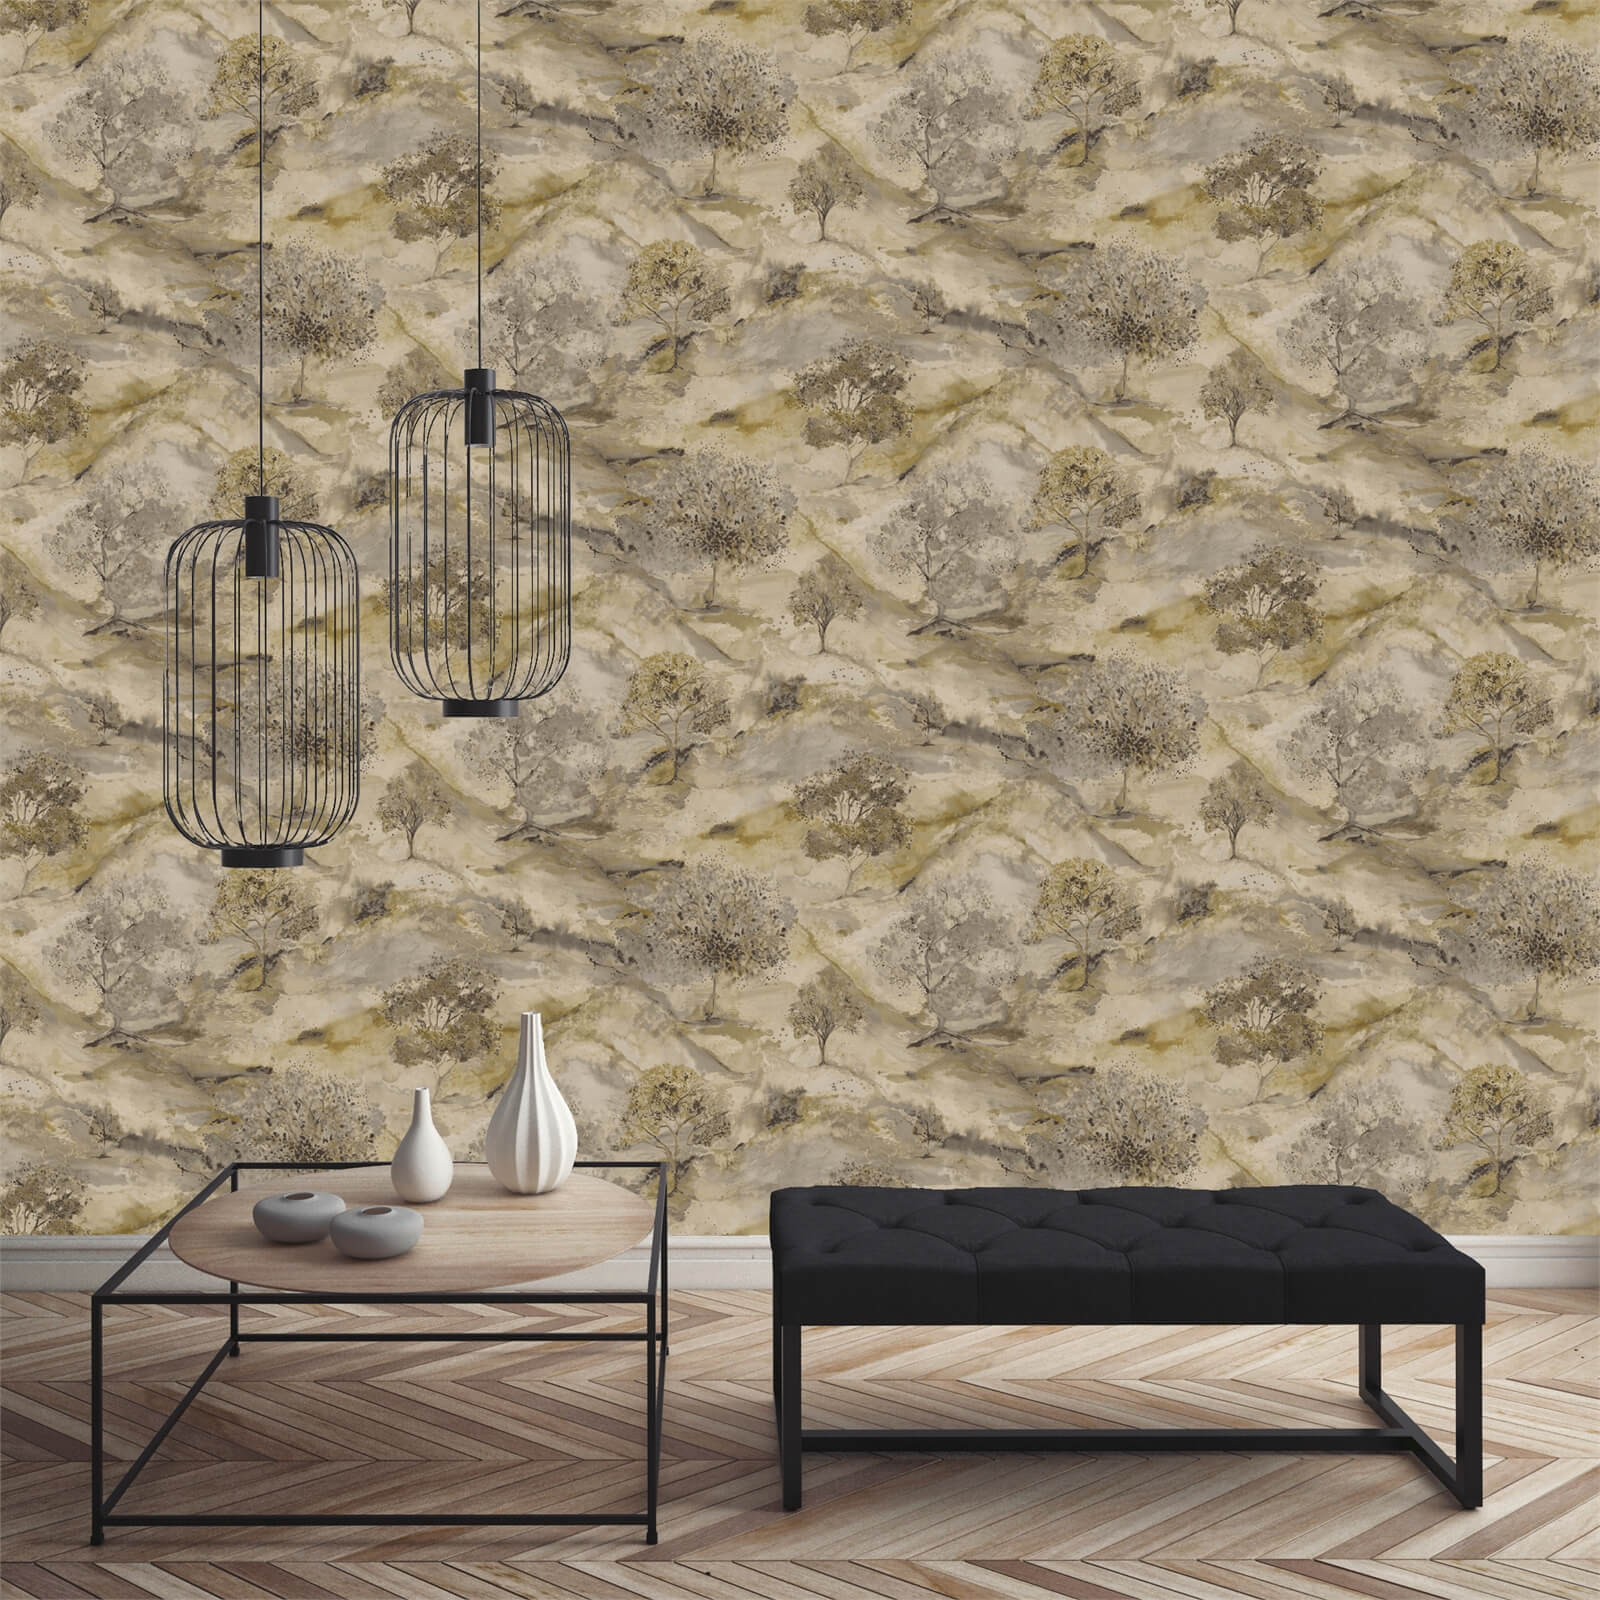 Holden Decor Ascadia Tree Textured Metallic Gold and Charcoal Wallpaper